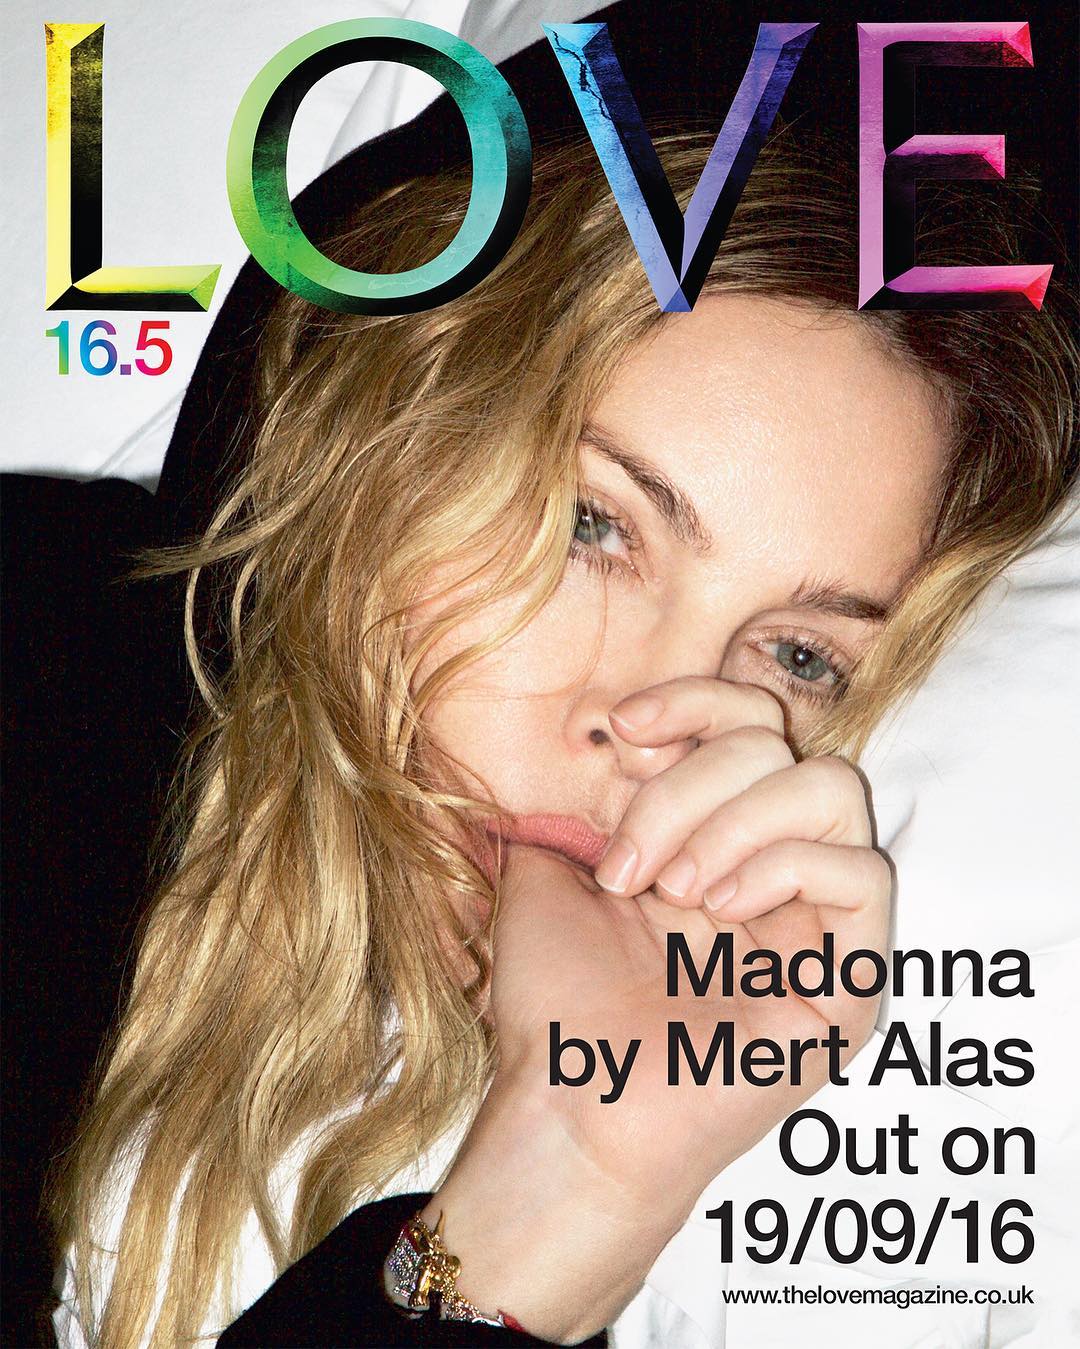 best of Is face sucked madonnas in Why